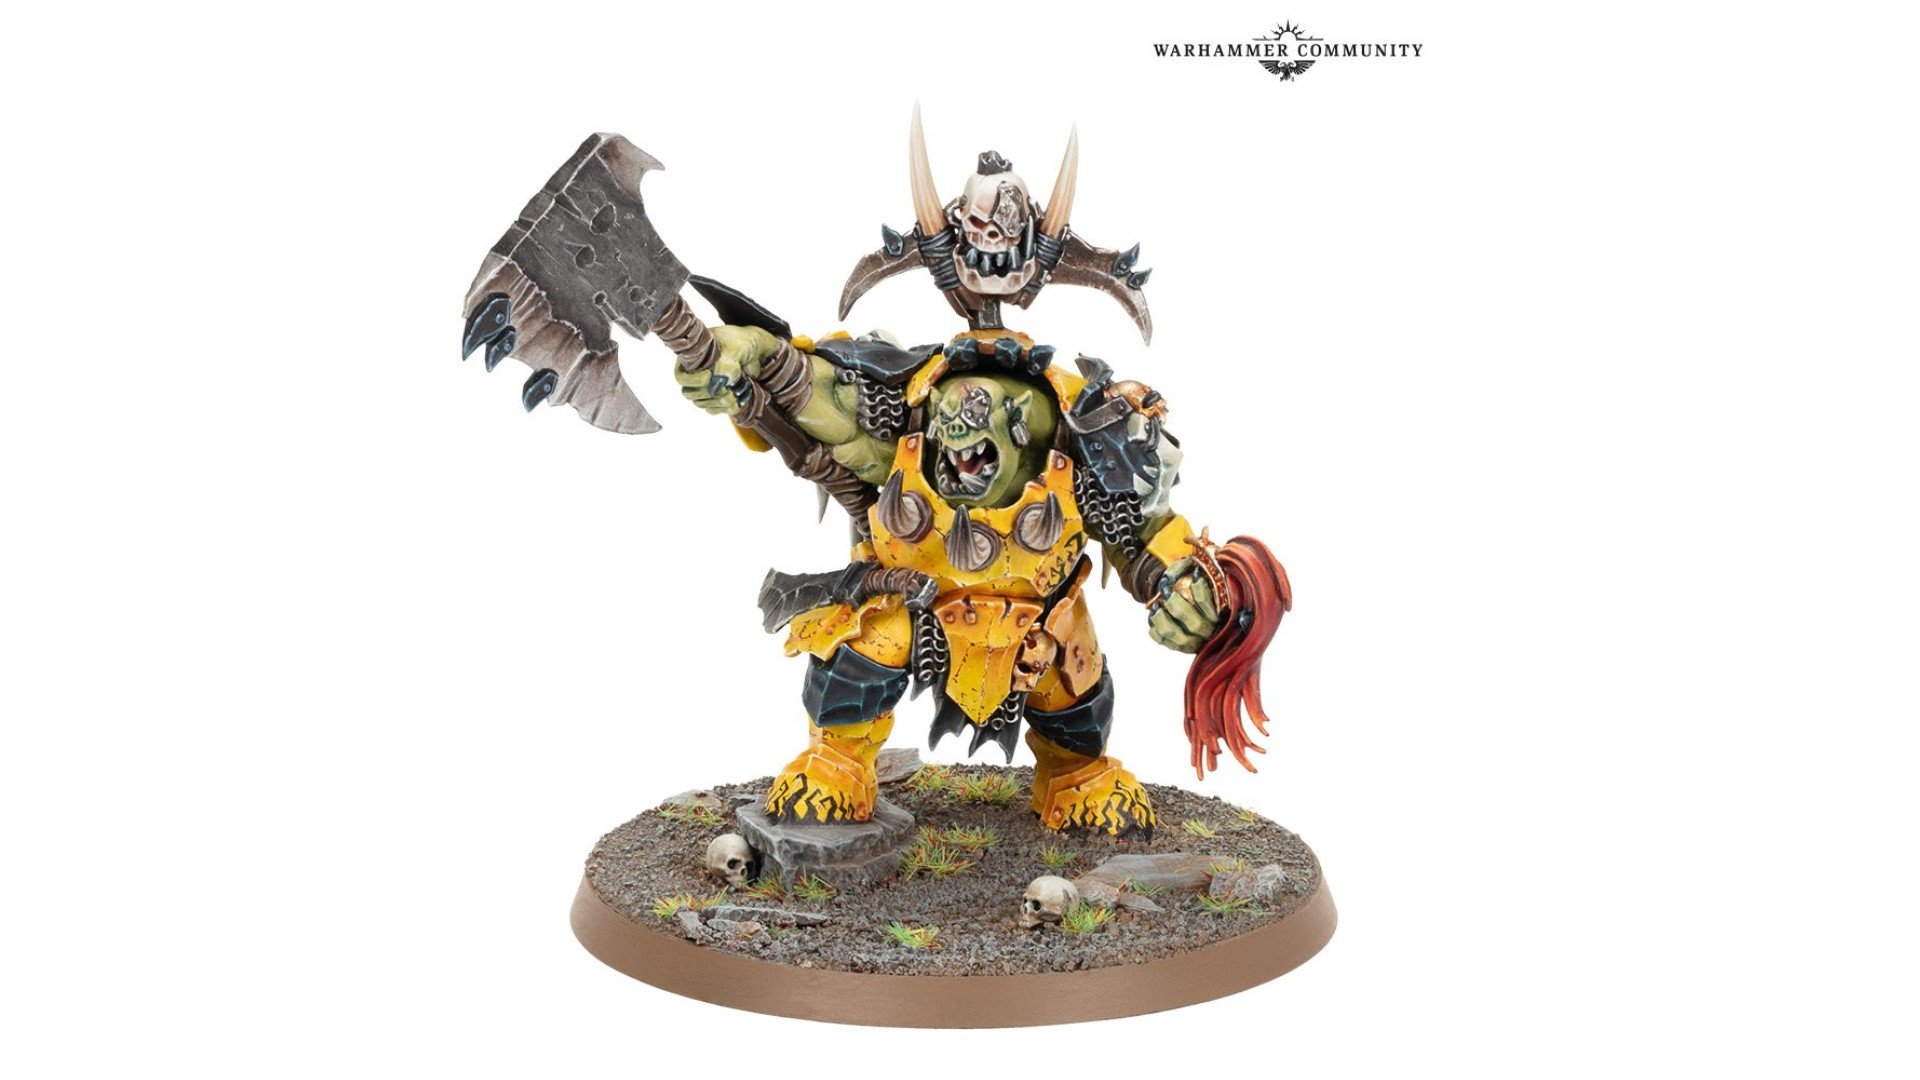 Warhammer+ future is bright - Warhammer Community photo showing the Orruk Megaboss exclusive model